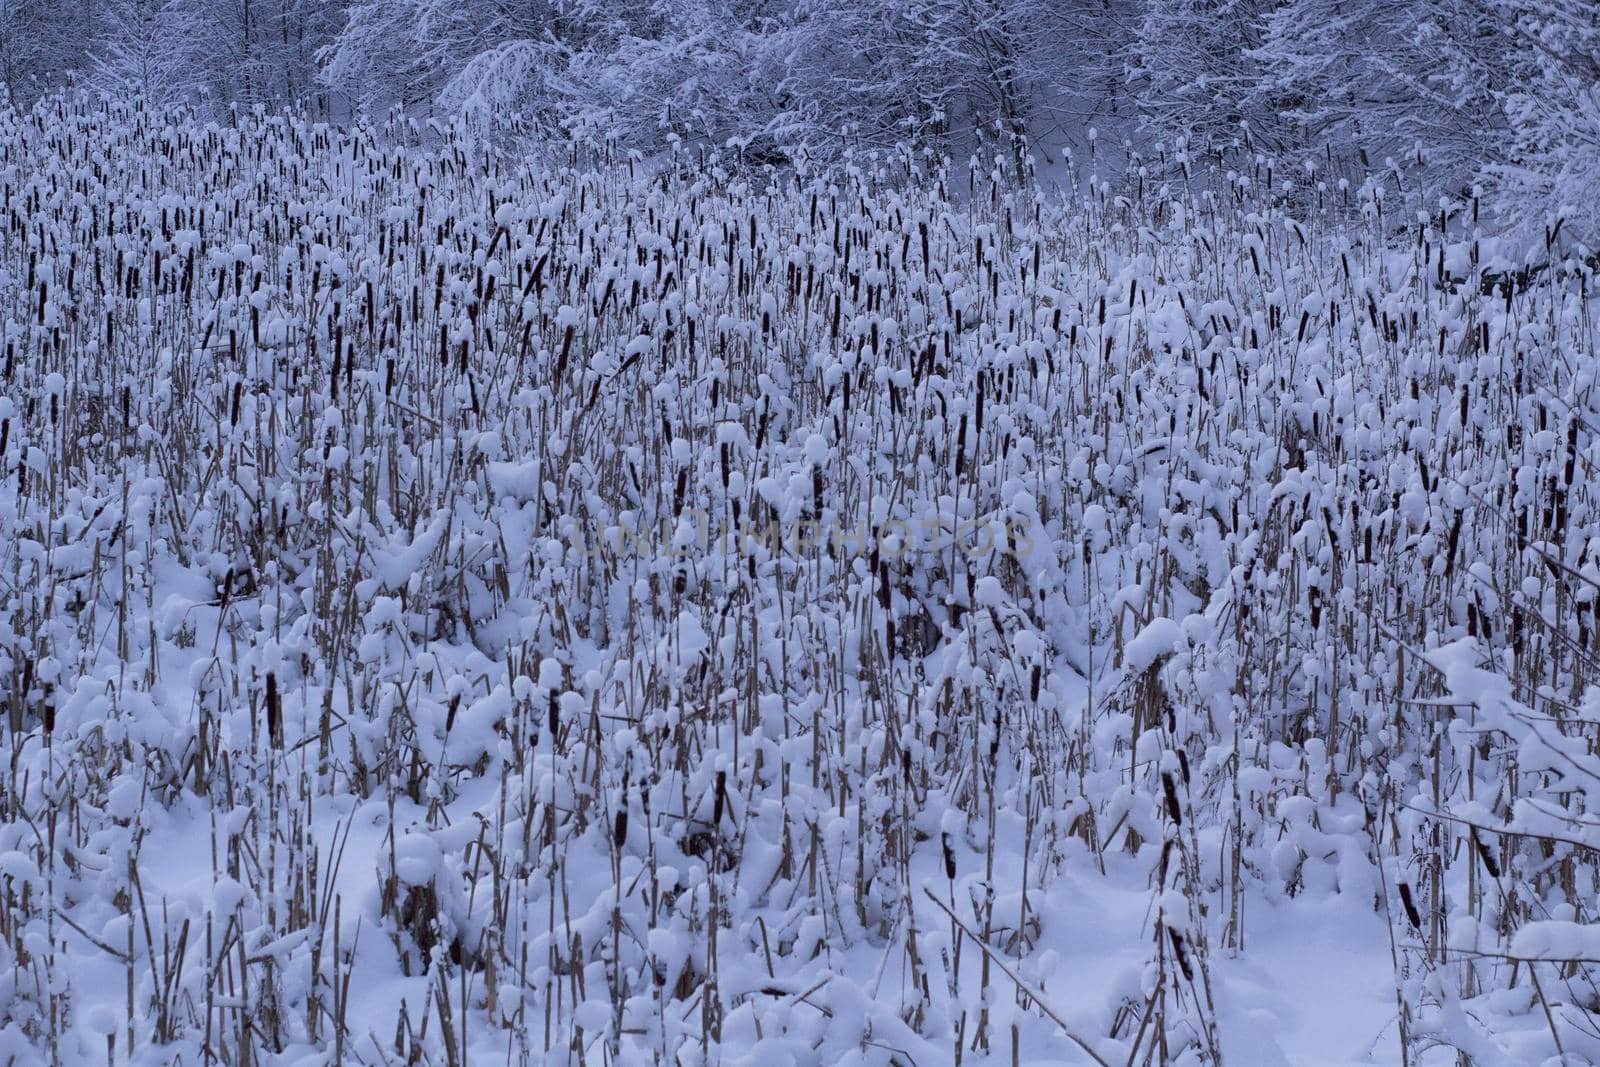 Field of Cattail in Winter Forest Covered Snow